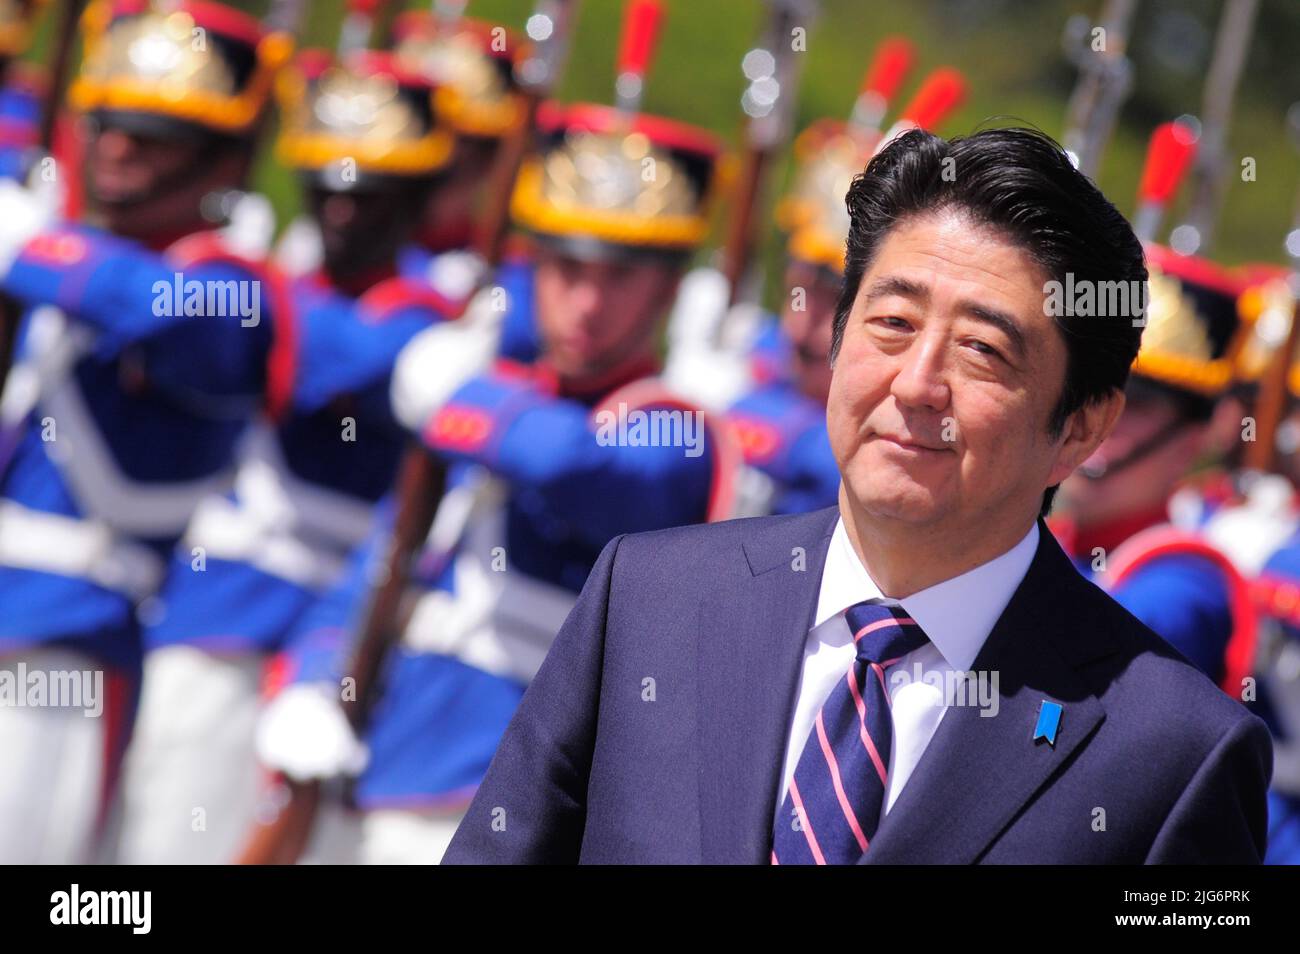 ***ATTENTION EDITOR FILE PHOTO FROM 01.08.2014 - BRASÍLIA, DF, 01.08.2014 - DEATH-SHINZO ABE - The then Prime Minister of Japan, Shinzo Abe, is received by the then President of Brazil Dilma Rousseff at Palácio do Planalto, in Brasília, this Friday, 1st. This Friday, July 08, 2022, former Prime Minister Shinzo Abe dies after being shot in Japan. The former prime minister was hit during a speech in the western city of Nara. A man was arrested and a shotgun seized. Death shocked Japan, where gun control is strict and similar cases are very rare. Credit: Brazil Photo Press/Alamy Live News Stock Photo